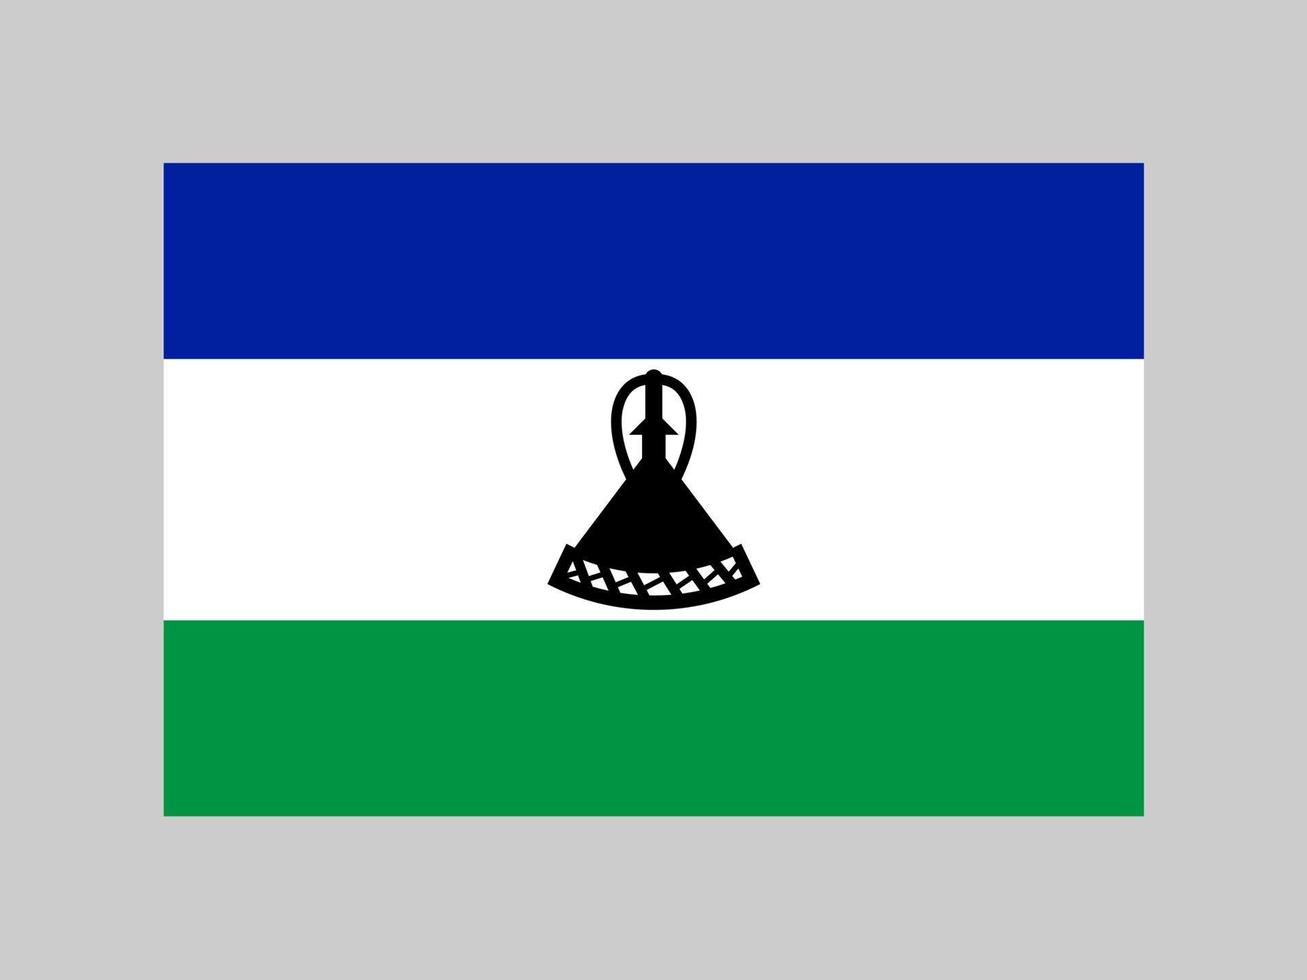 Lesotho flag, official colors and proportion. Vector illustration.